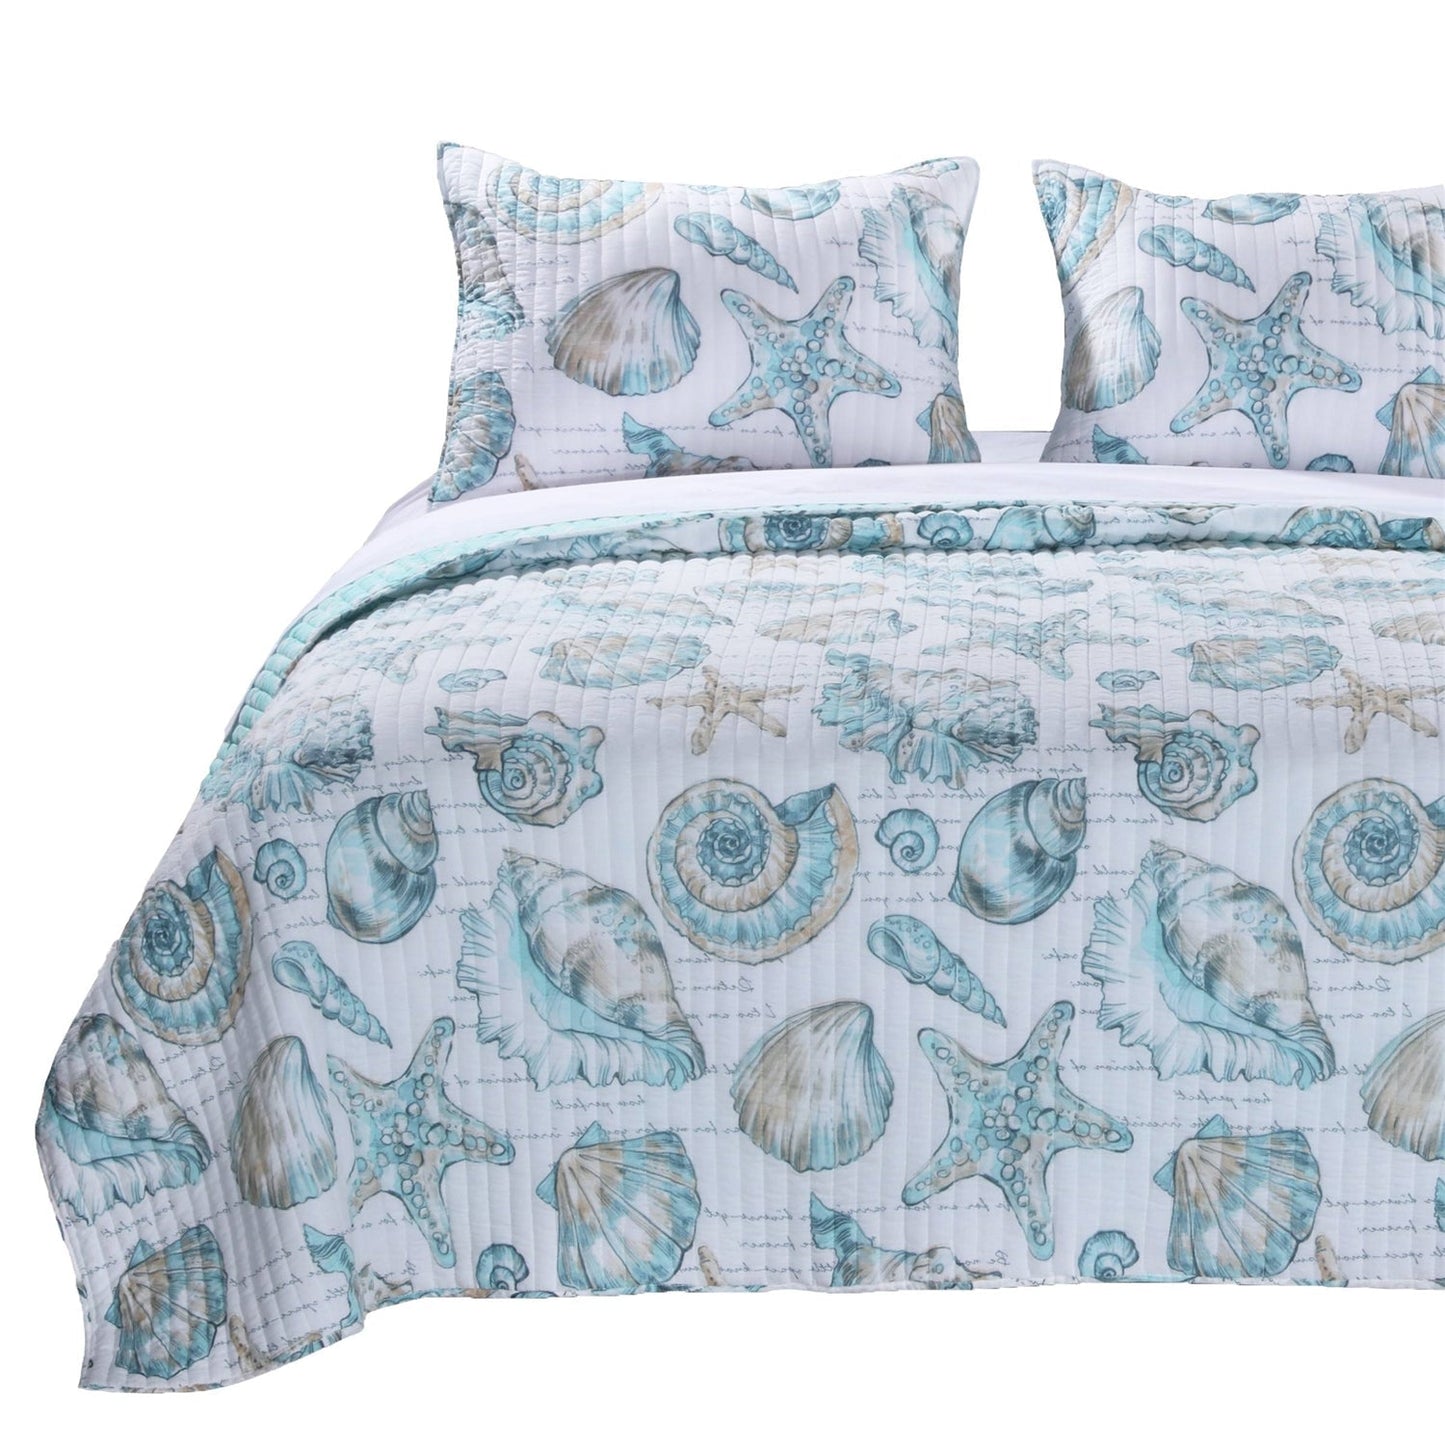 Bedroom > Quilts & Blankets - Full / Queen Coastal Seashells White Teal 3 Piece Polyester Reversible Quilt Set